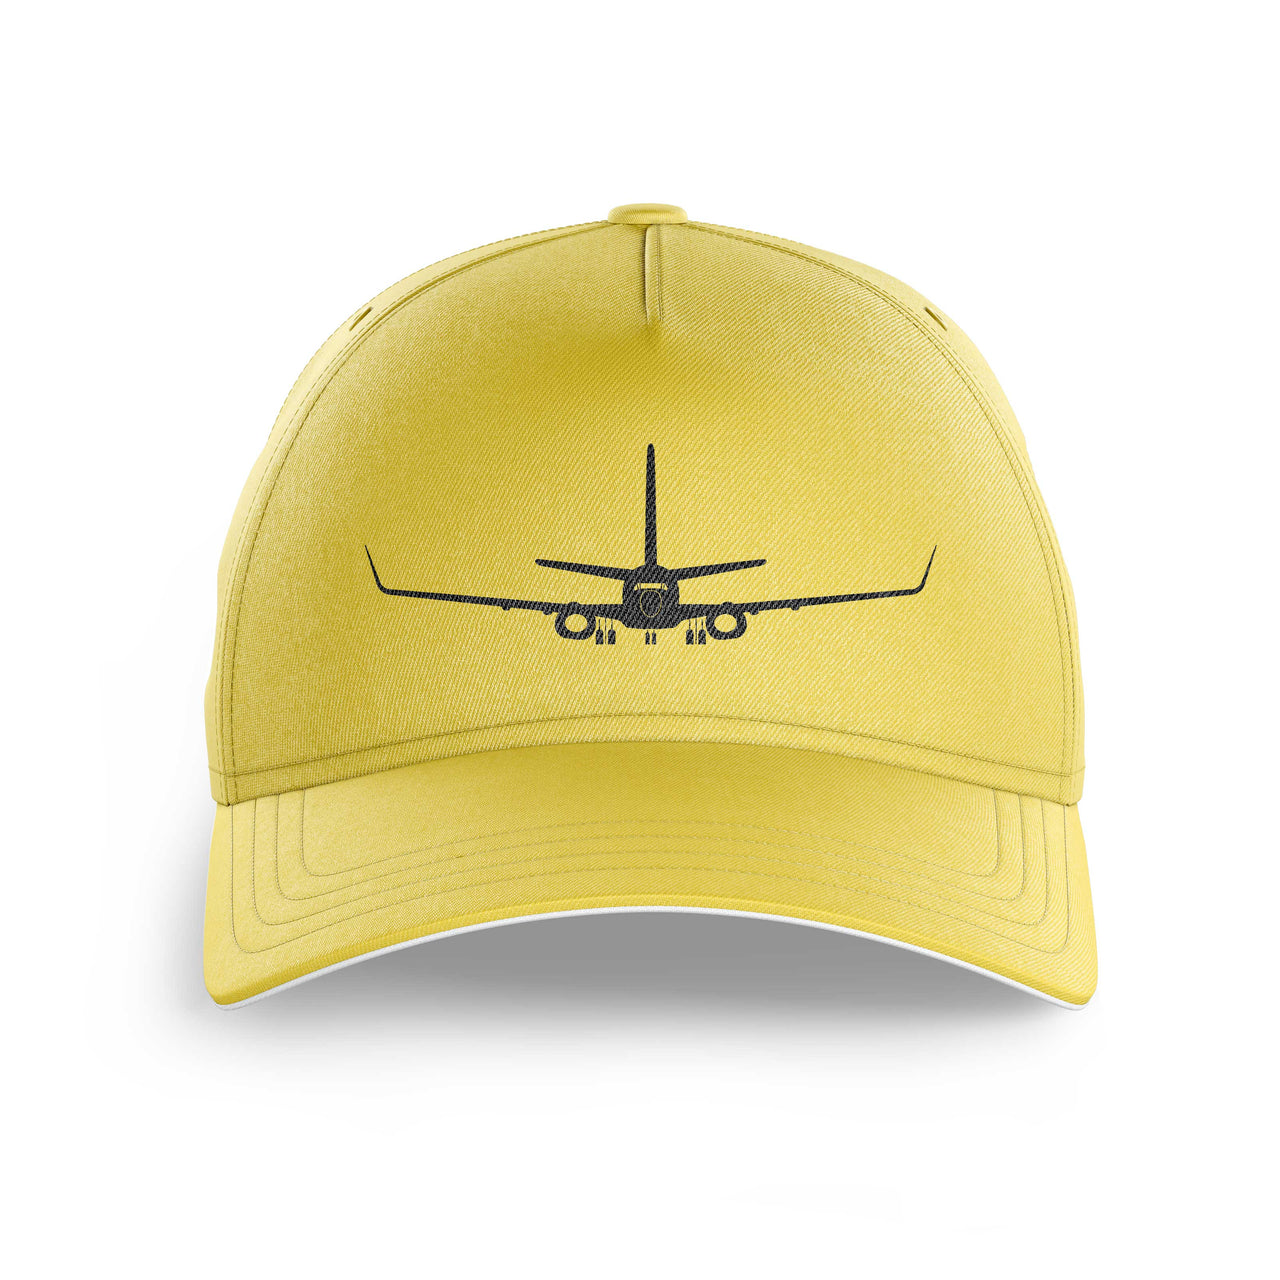 Boeing 737-800NG Silhouette Printed Hats